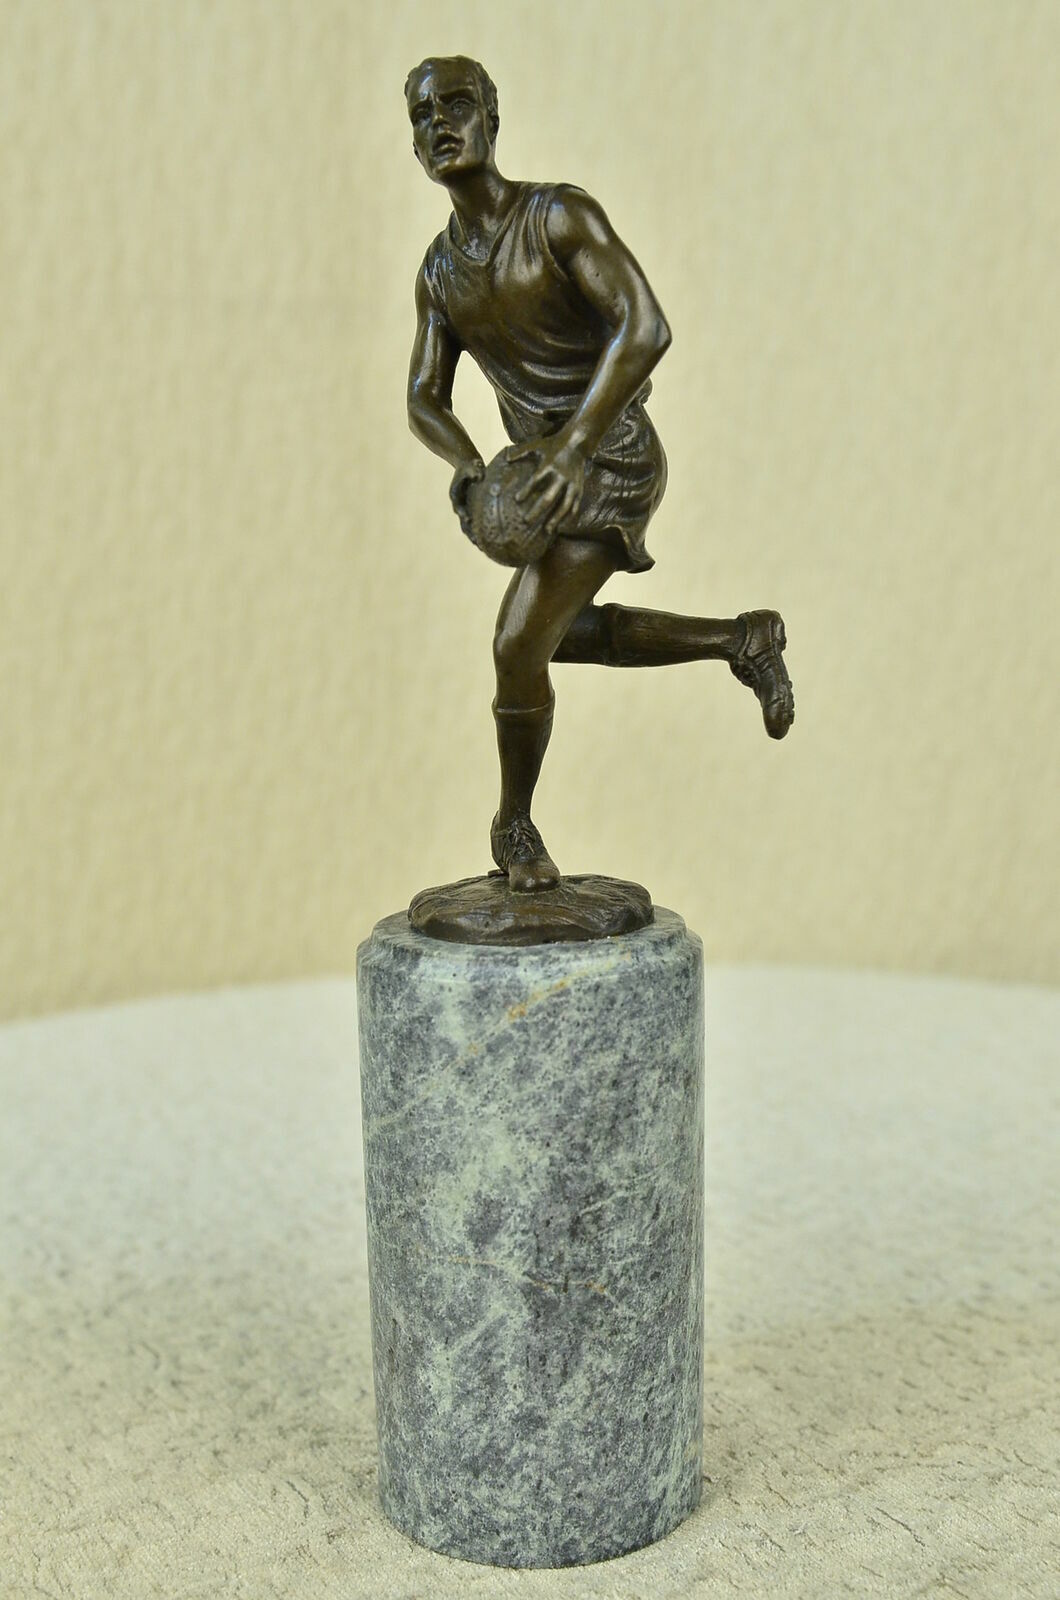 Handcrafted bronze sculpture SALE Trophy Player Football Rugby League Union Sale